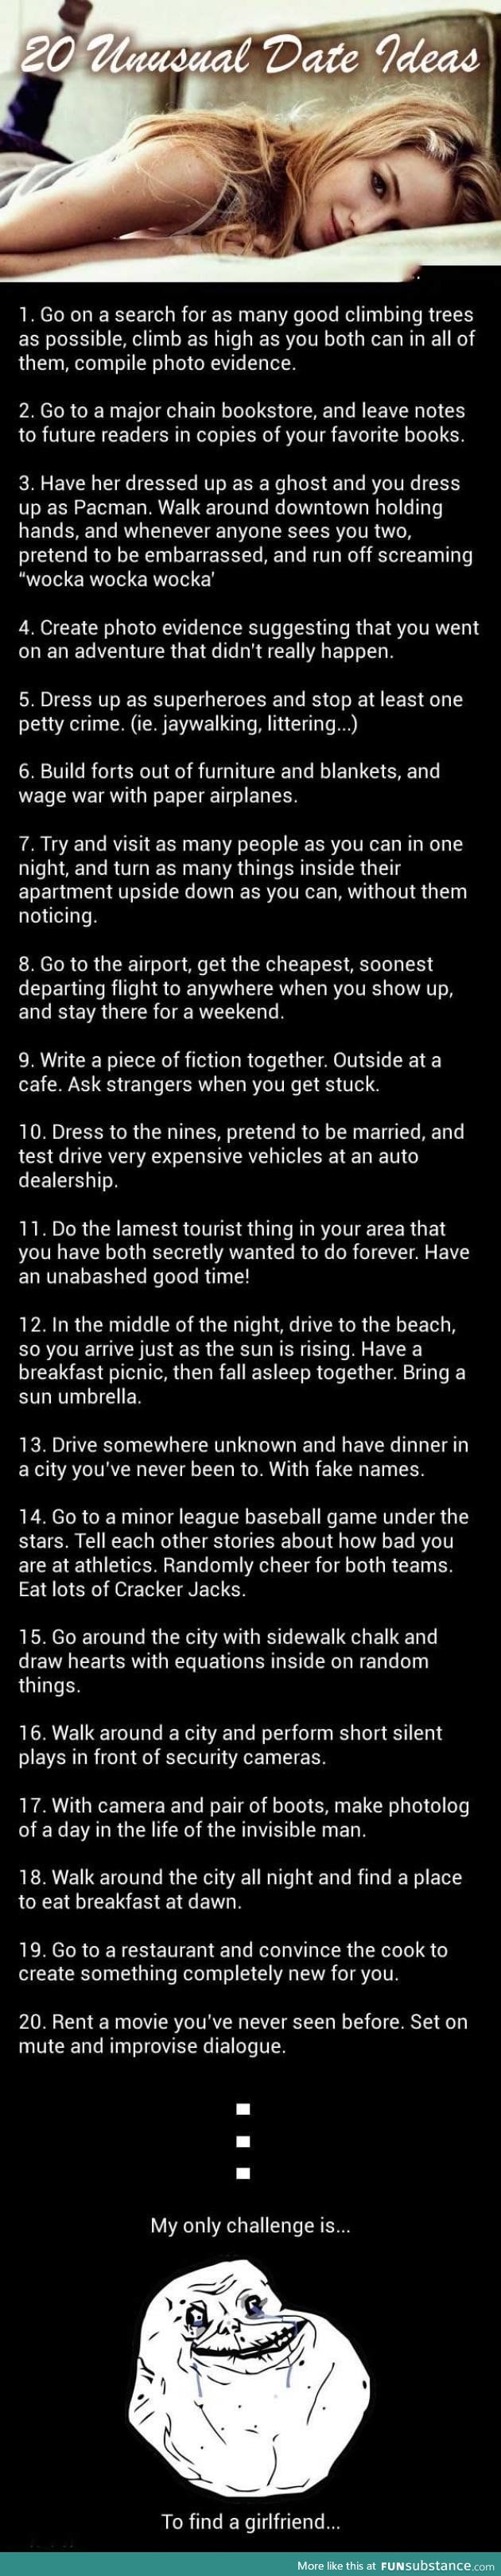 20 unusual but awesome date ideas